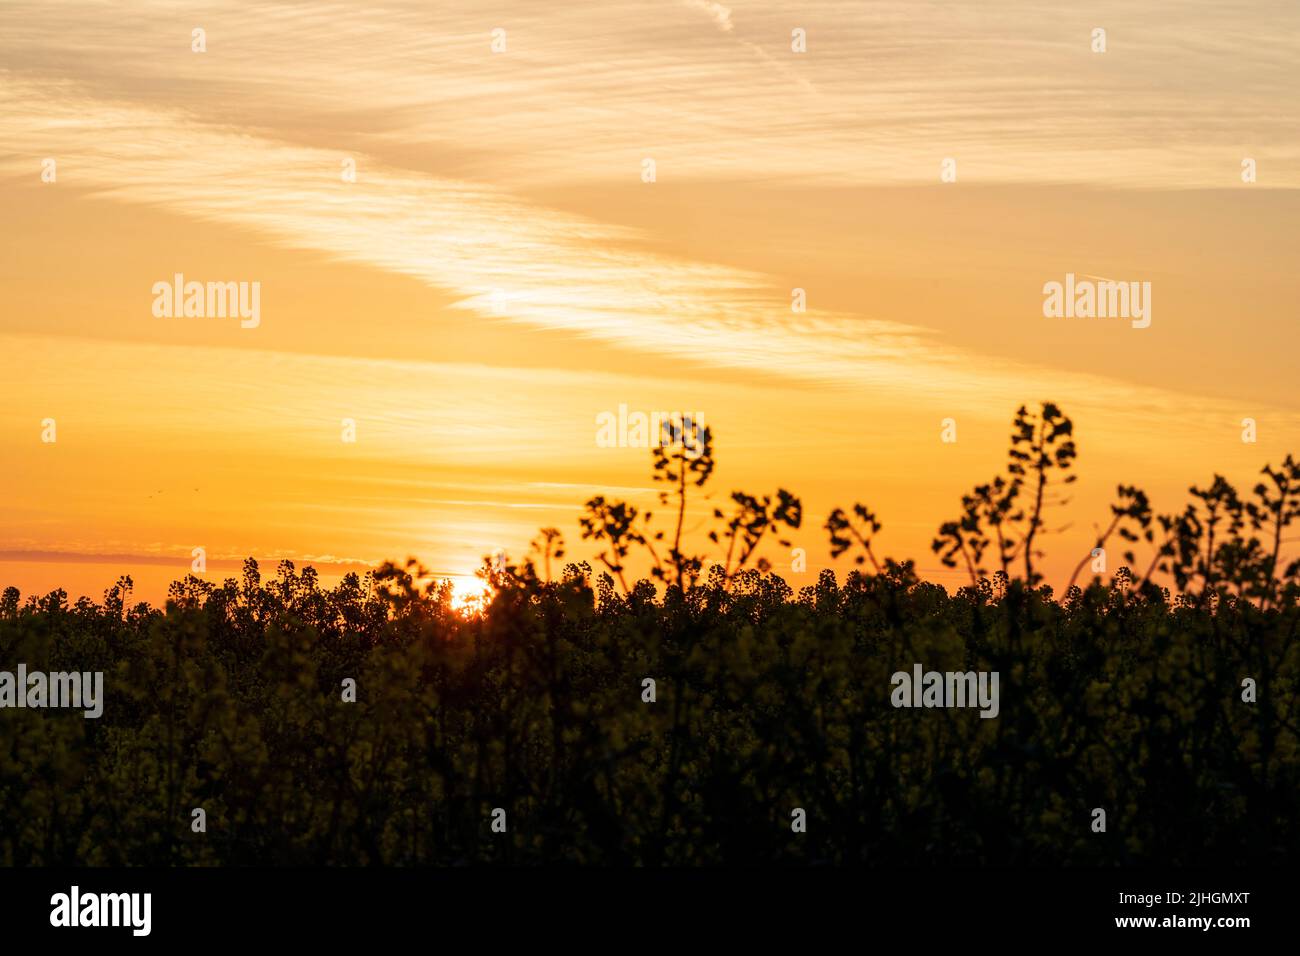 Close up of rapeseed, oilseed, almost silhouetted against the rising sun and a yellow orange sky above with brands of altocumulus stratiformis clouds. Stock Photo